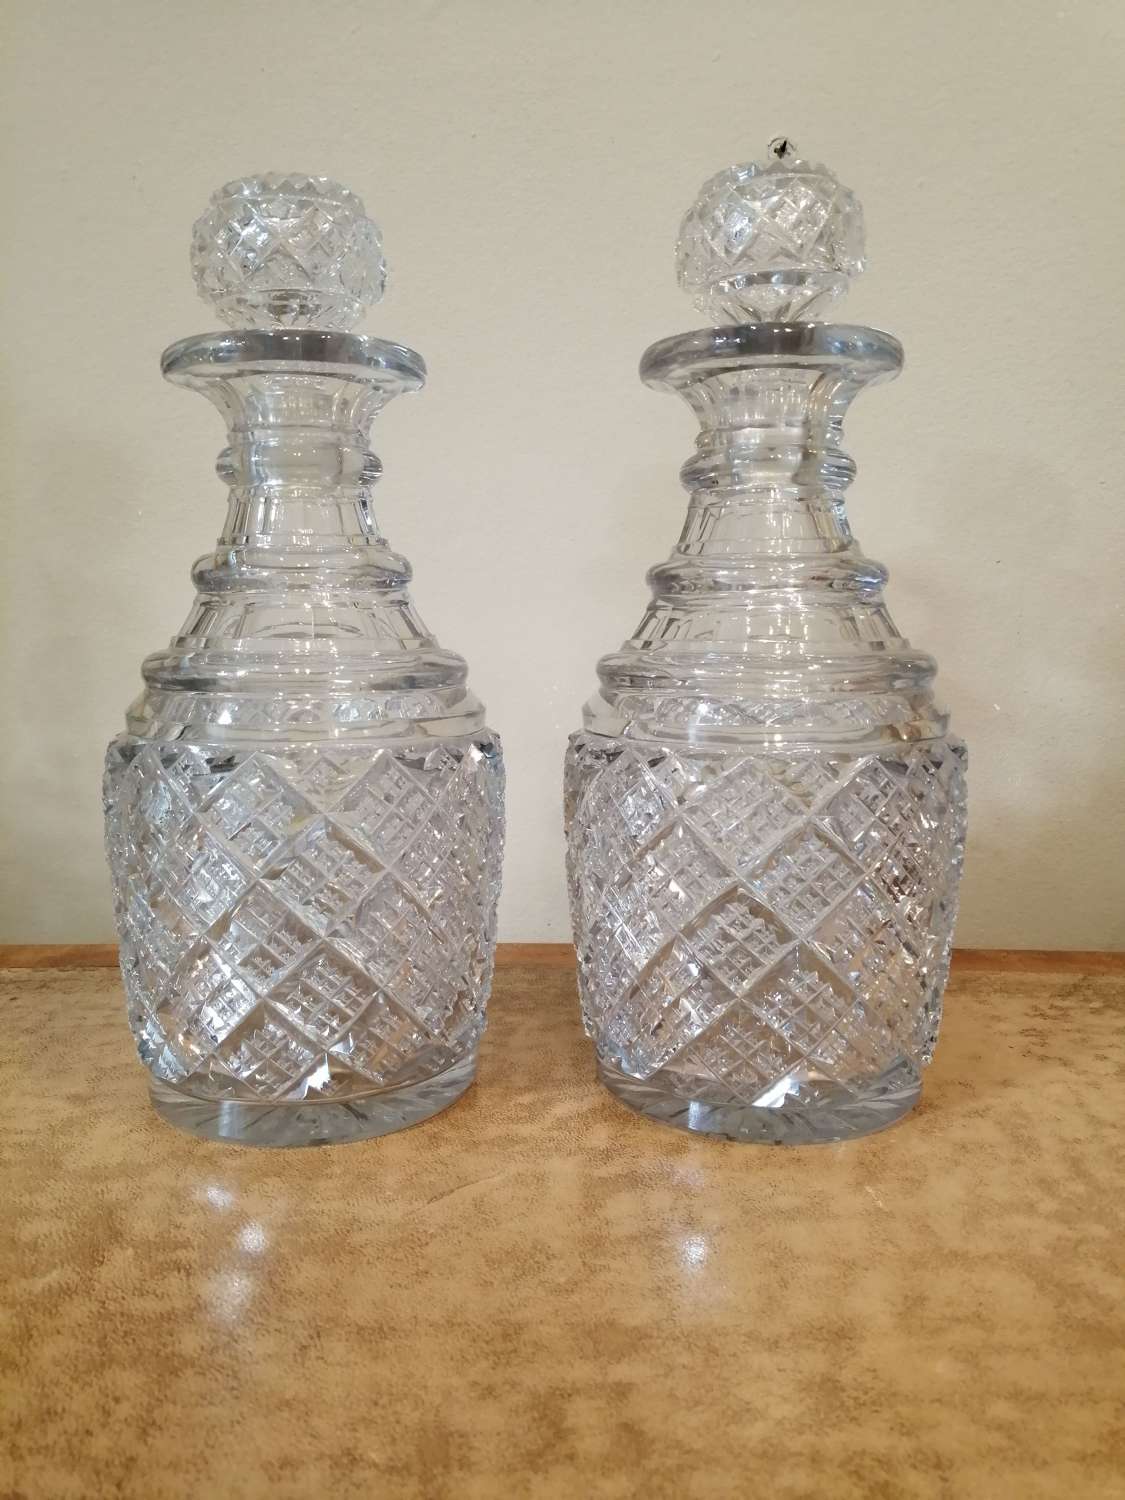 An excellent pair of 19th century triple ring cut glass decanters